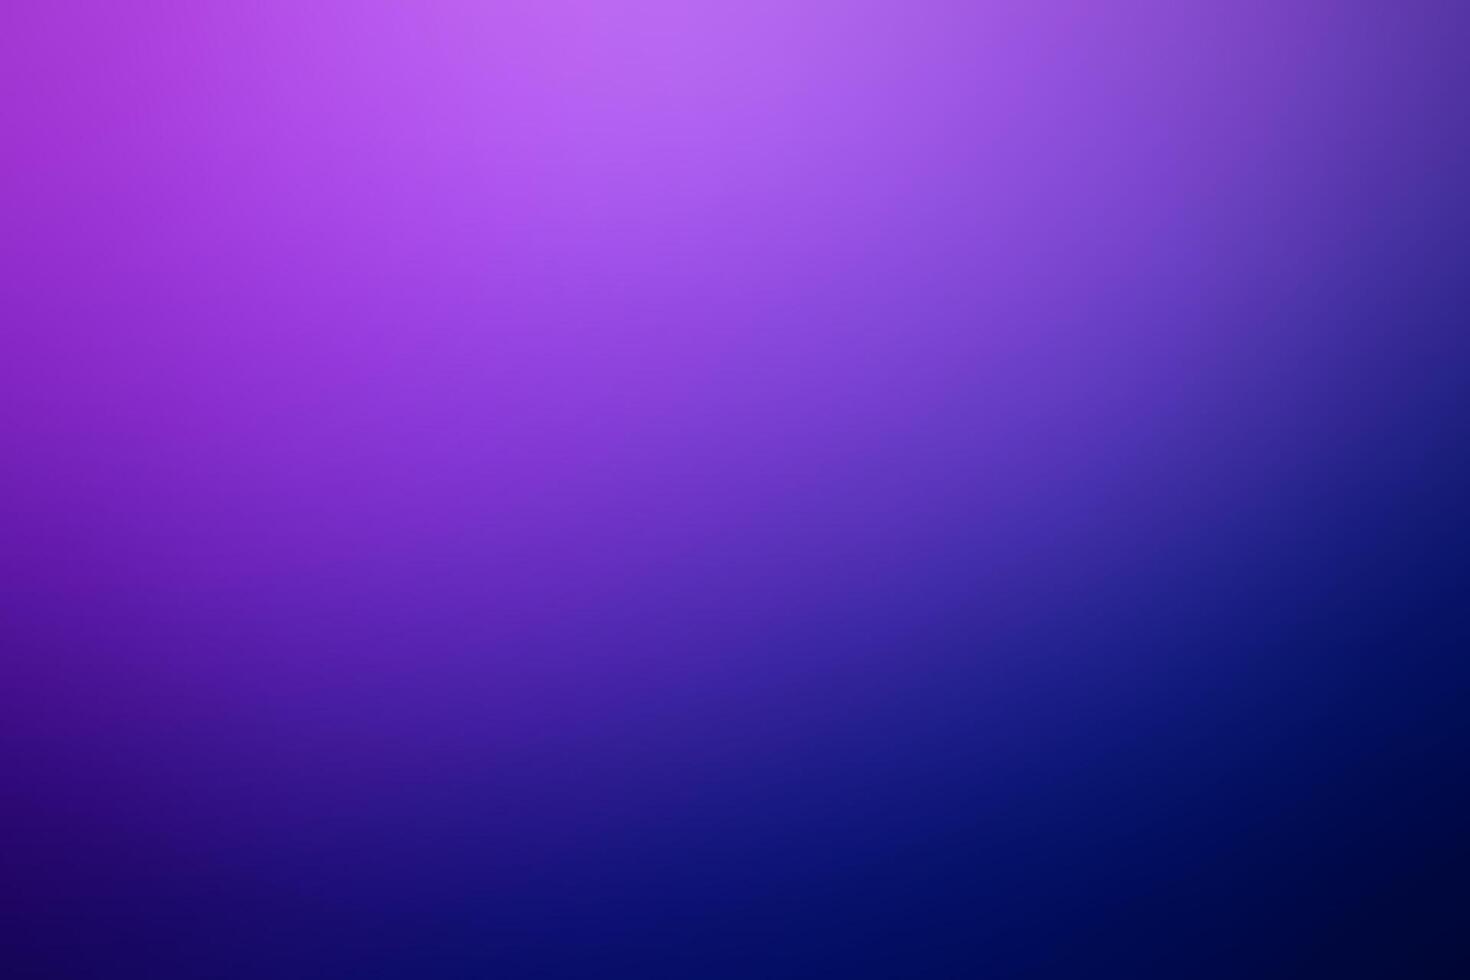 Trendy Colorful Blurry Wallpaper Background for Creators vector